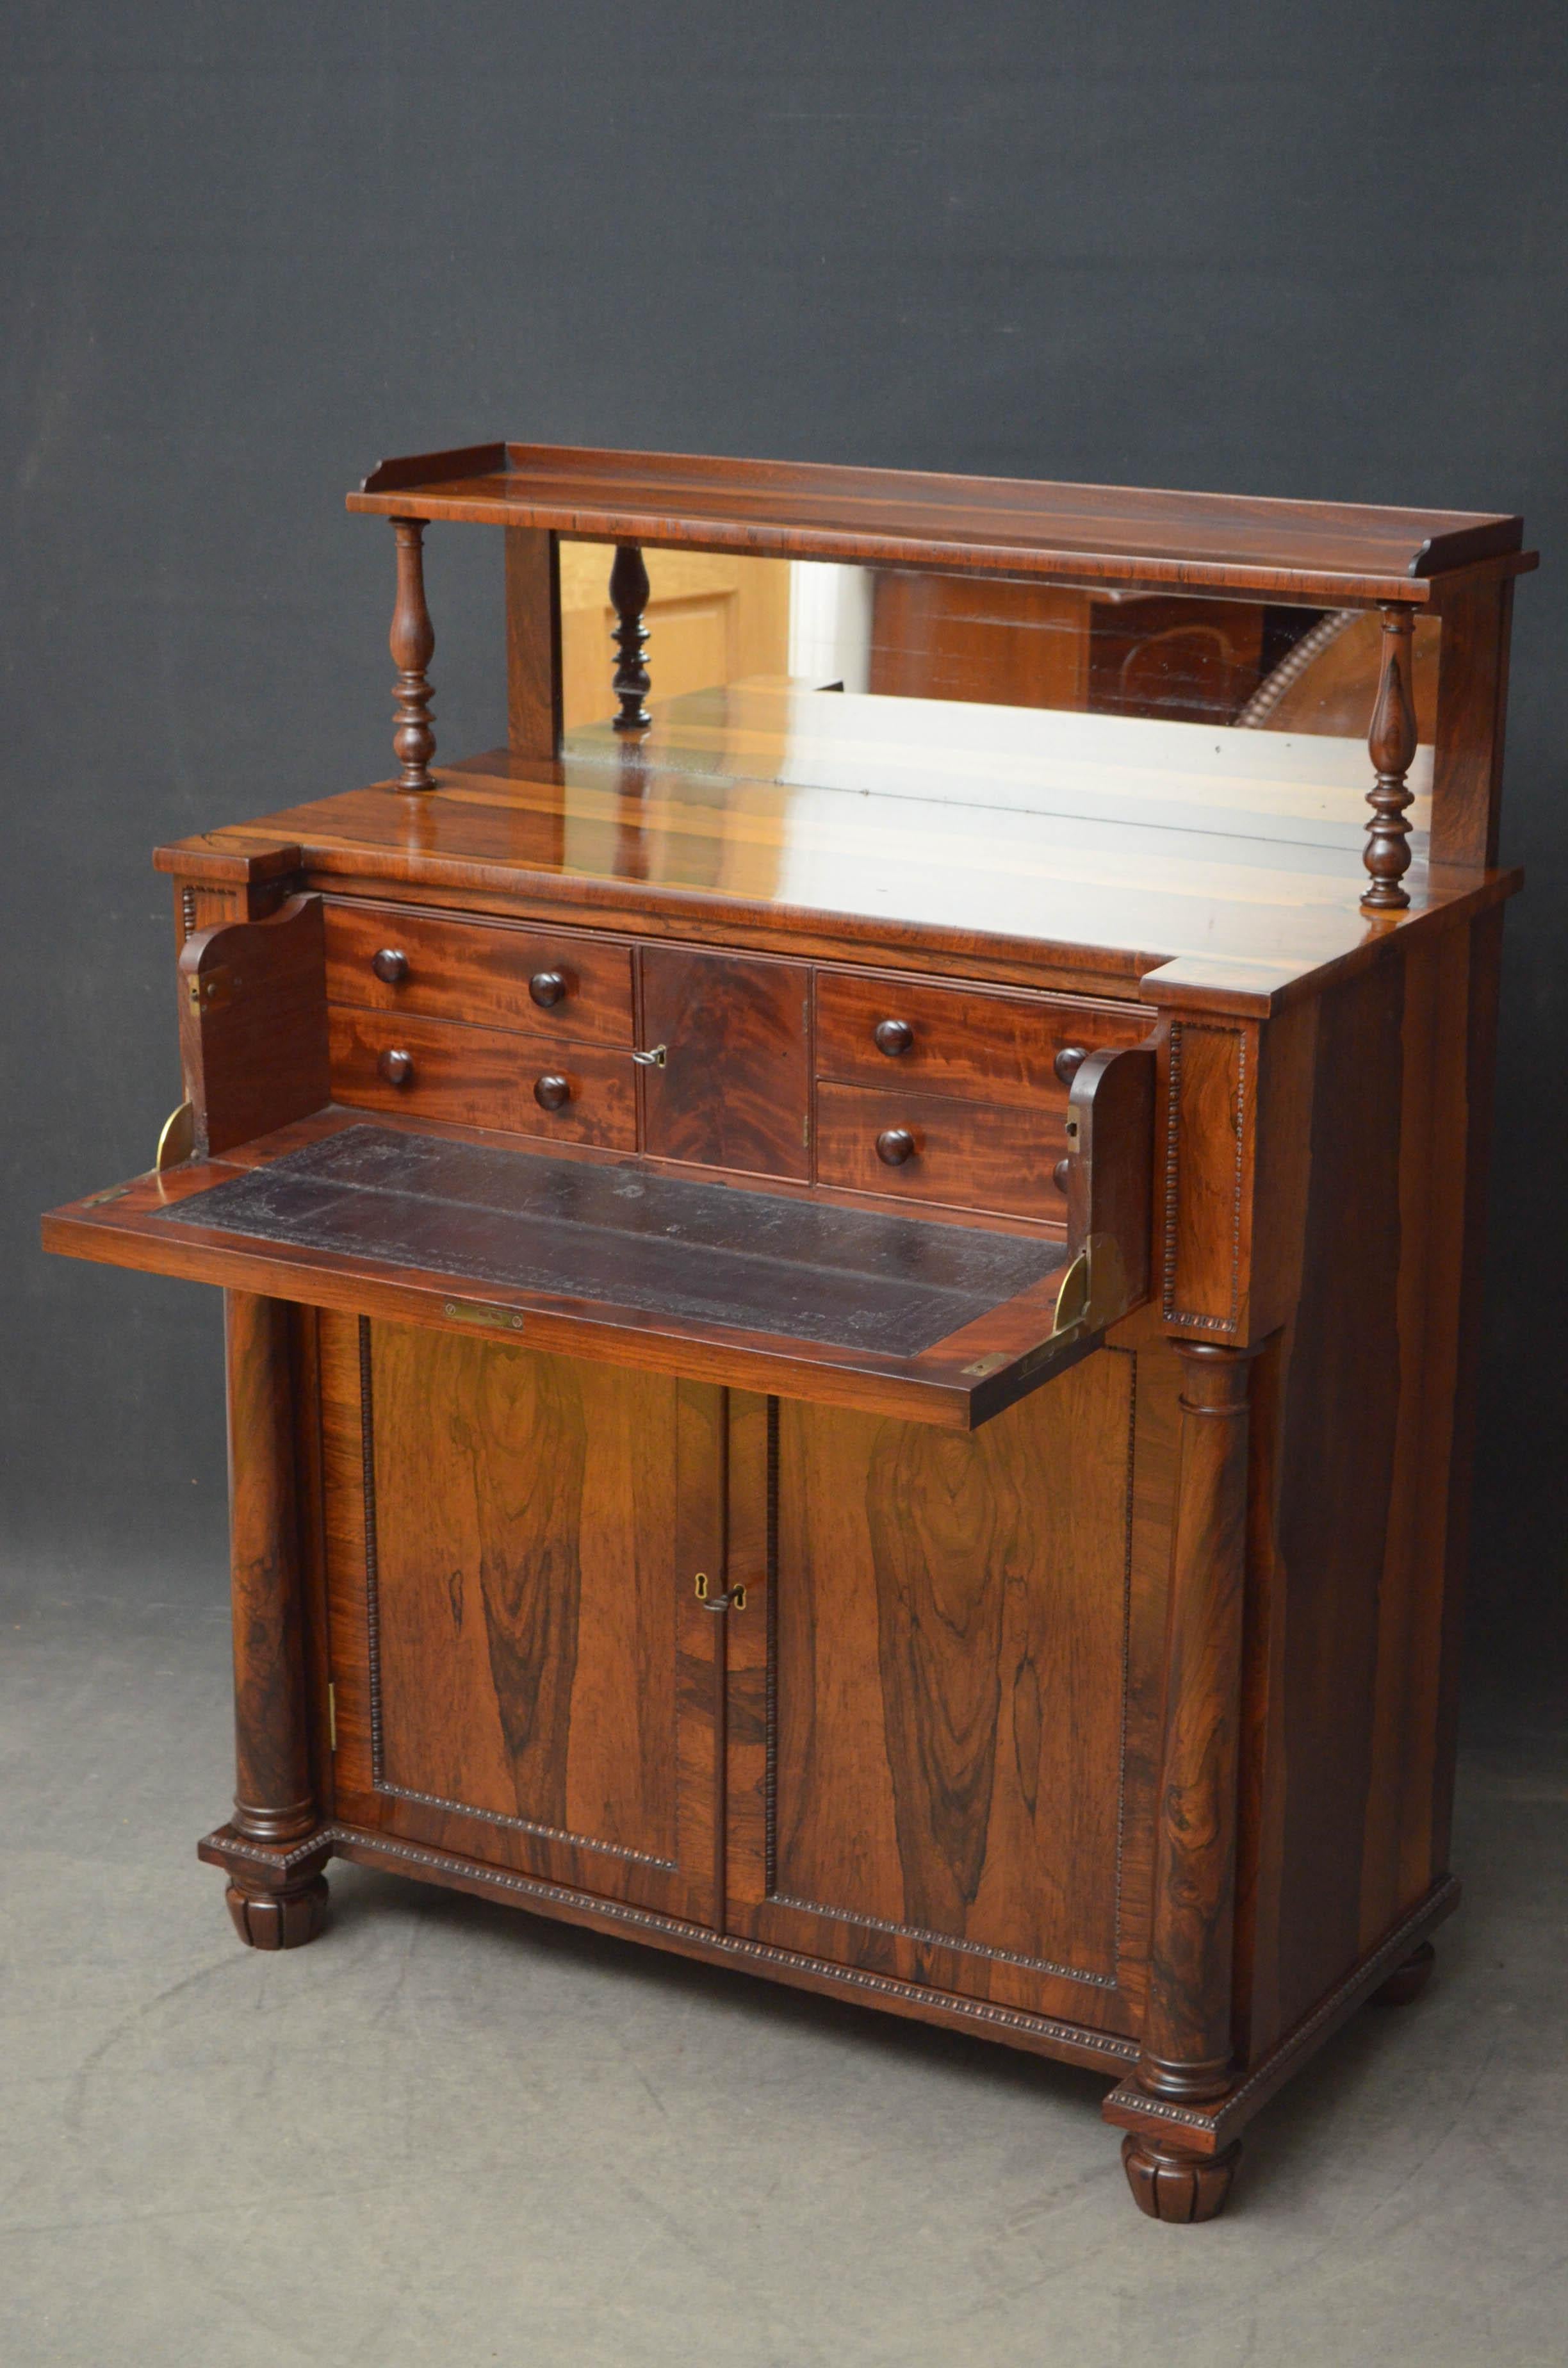 English Superb Quality Regency Chiffonier with Secretaire Section